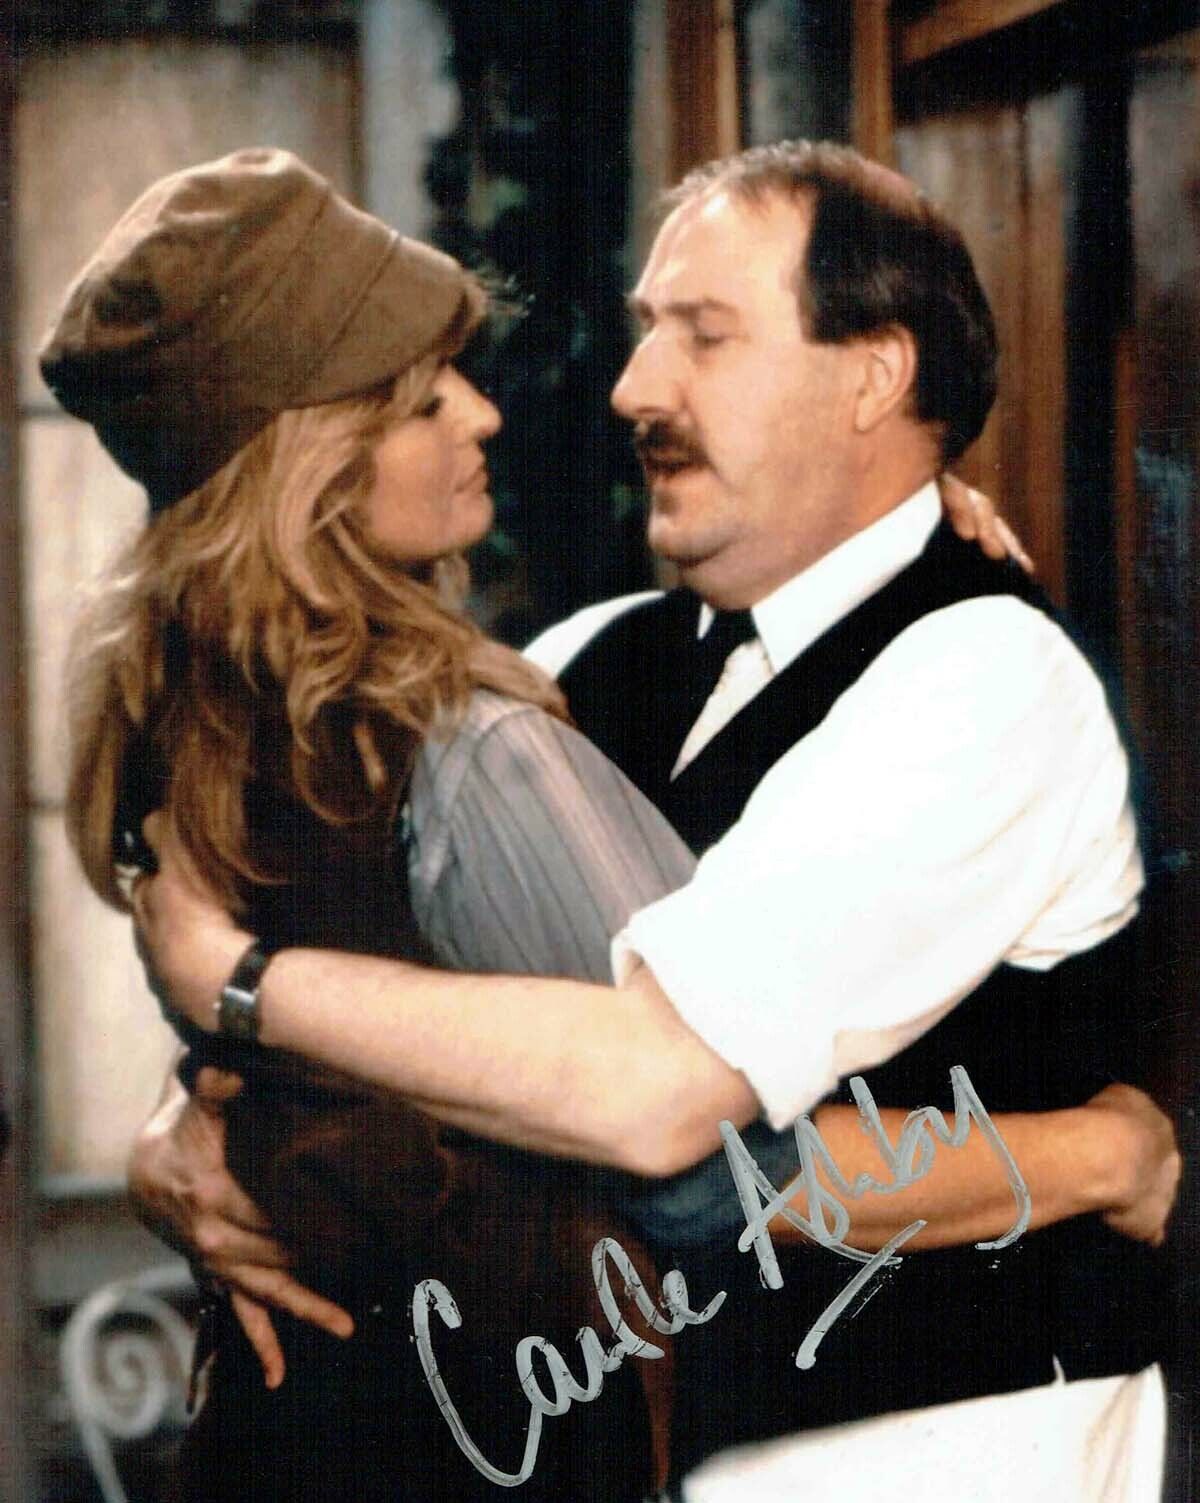 Carole ASHBY SIGNED 10x8 Autograph Photo Poster painting AFTAL COA Allo Allo Glamour Model